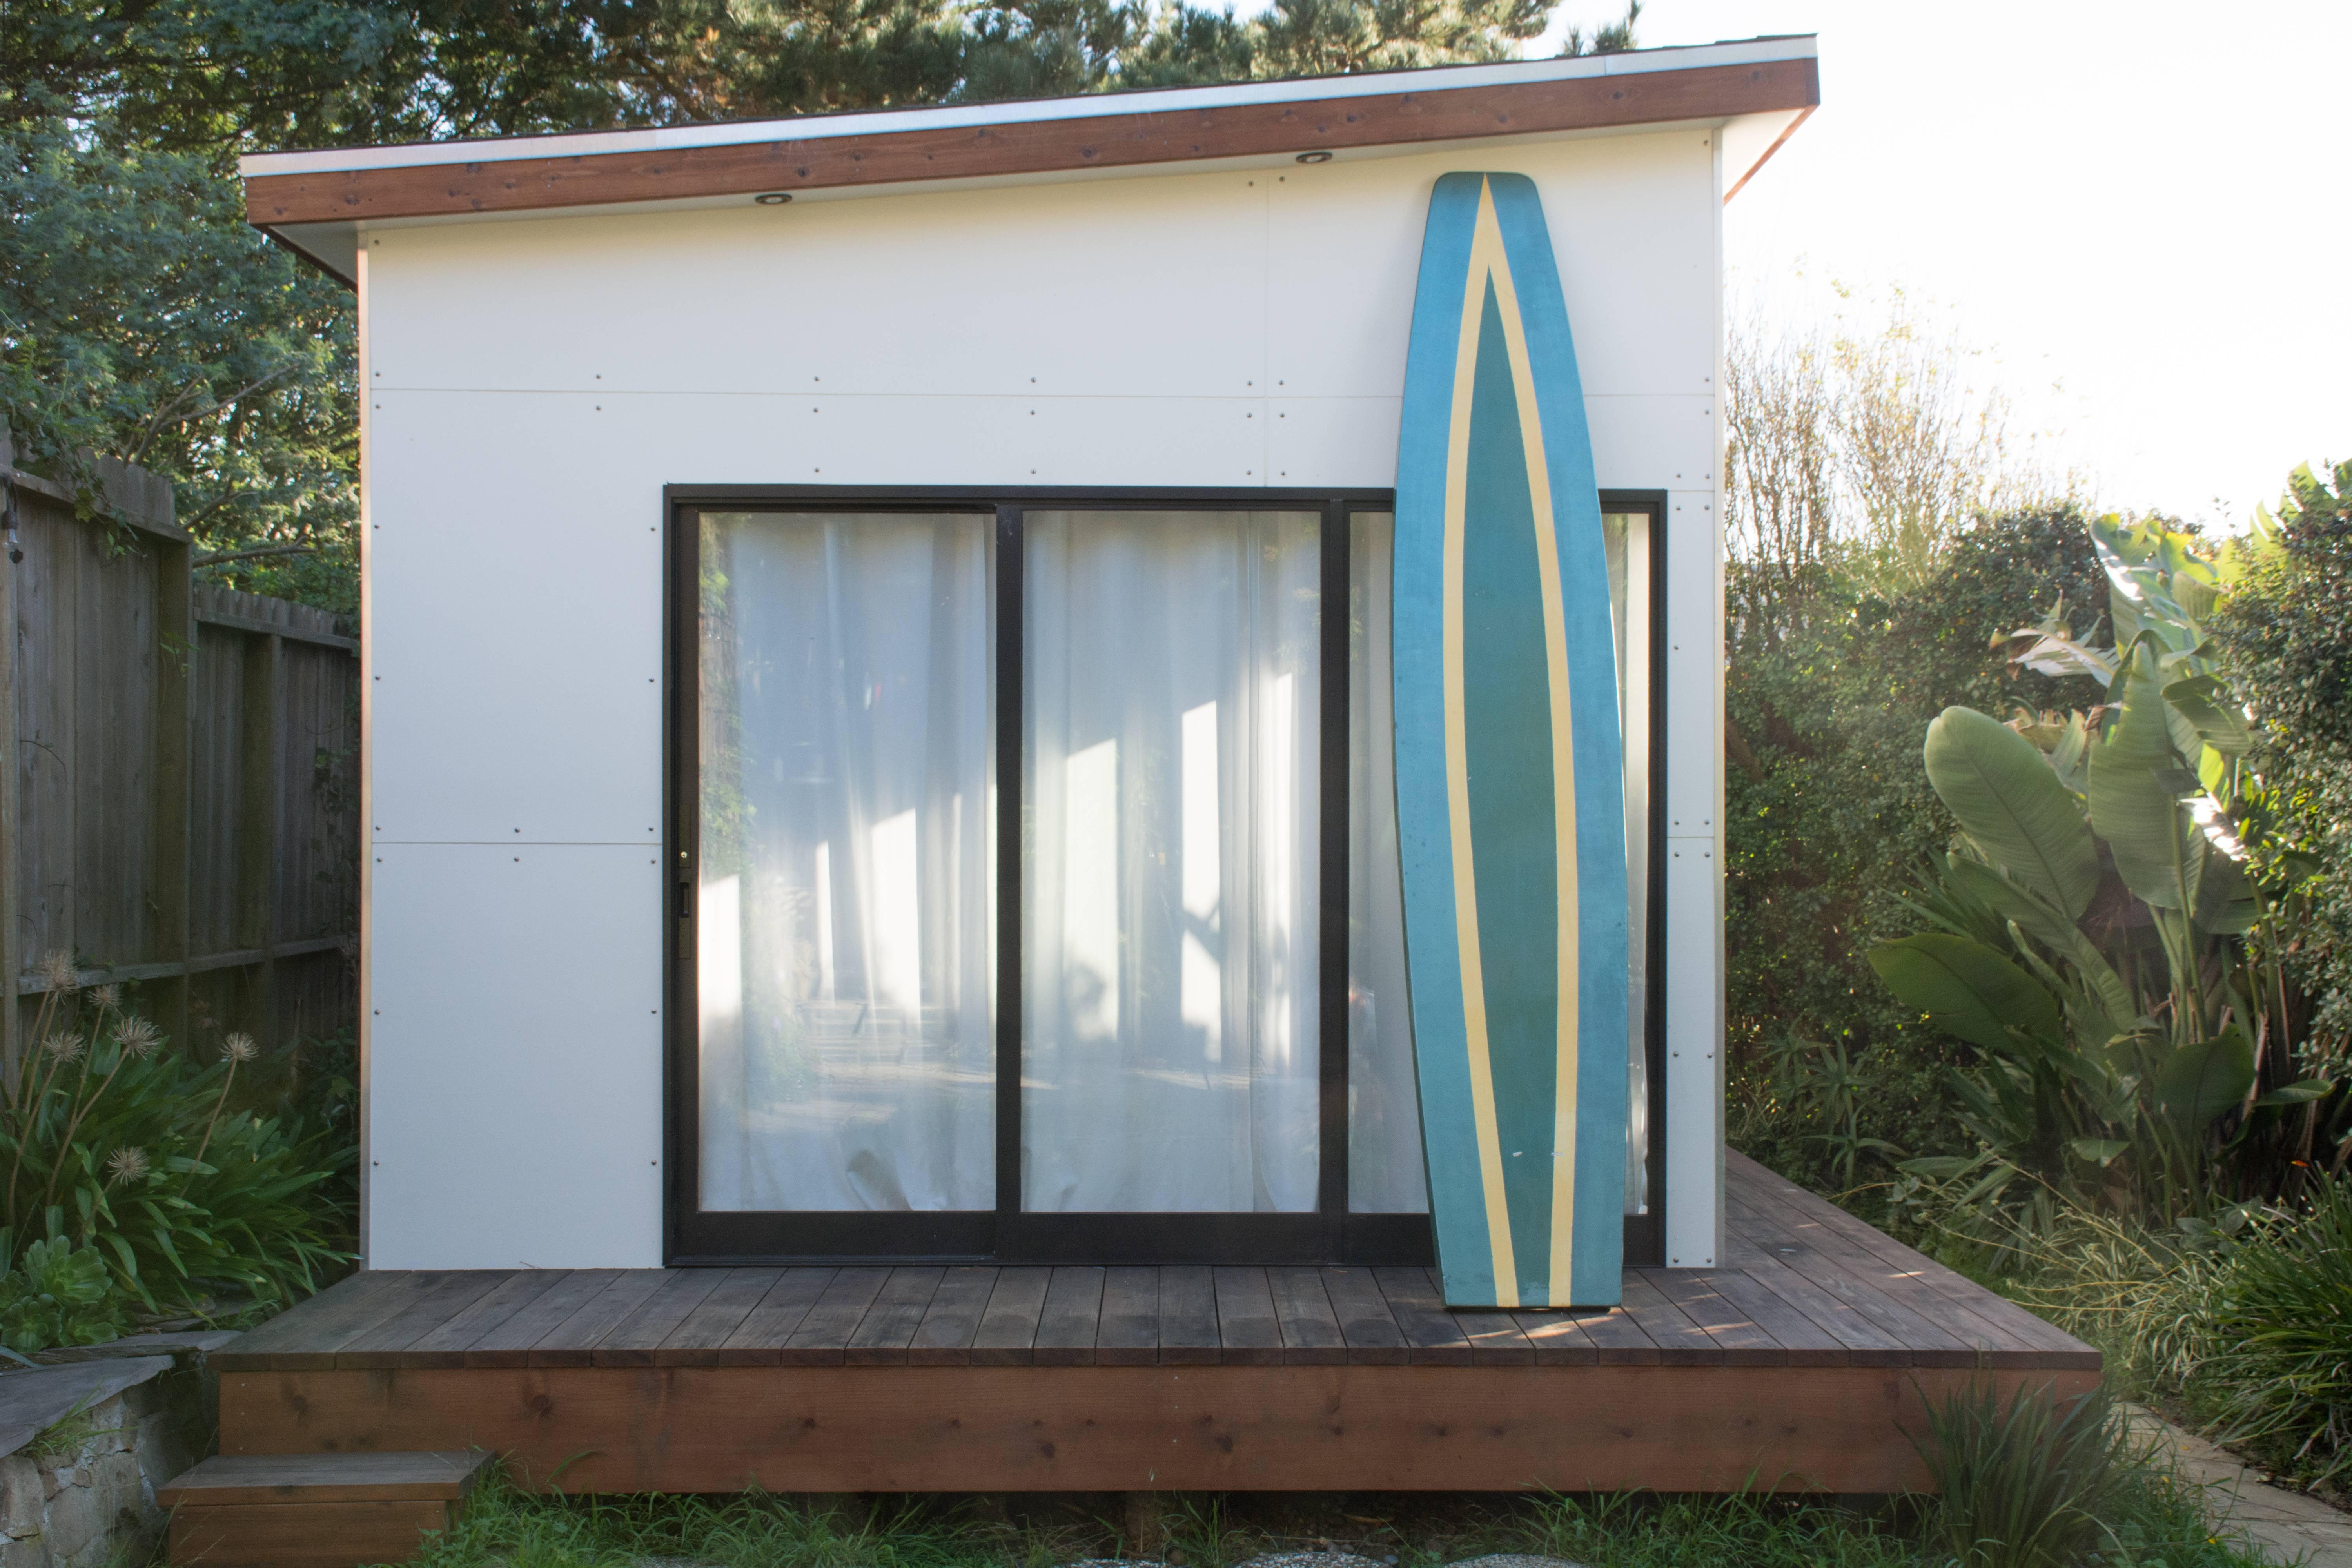 This vintage midcentury hollow surf or paddle board is in the style of Tom Blake.  It is constructed of balsa wood and is painted in green, yellow, and blue.  It can still be used, but is great as a unique collector's item.